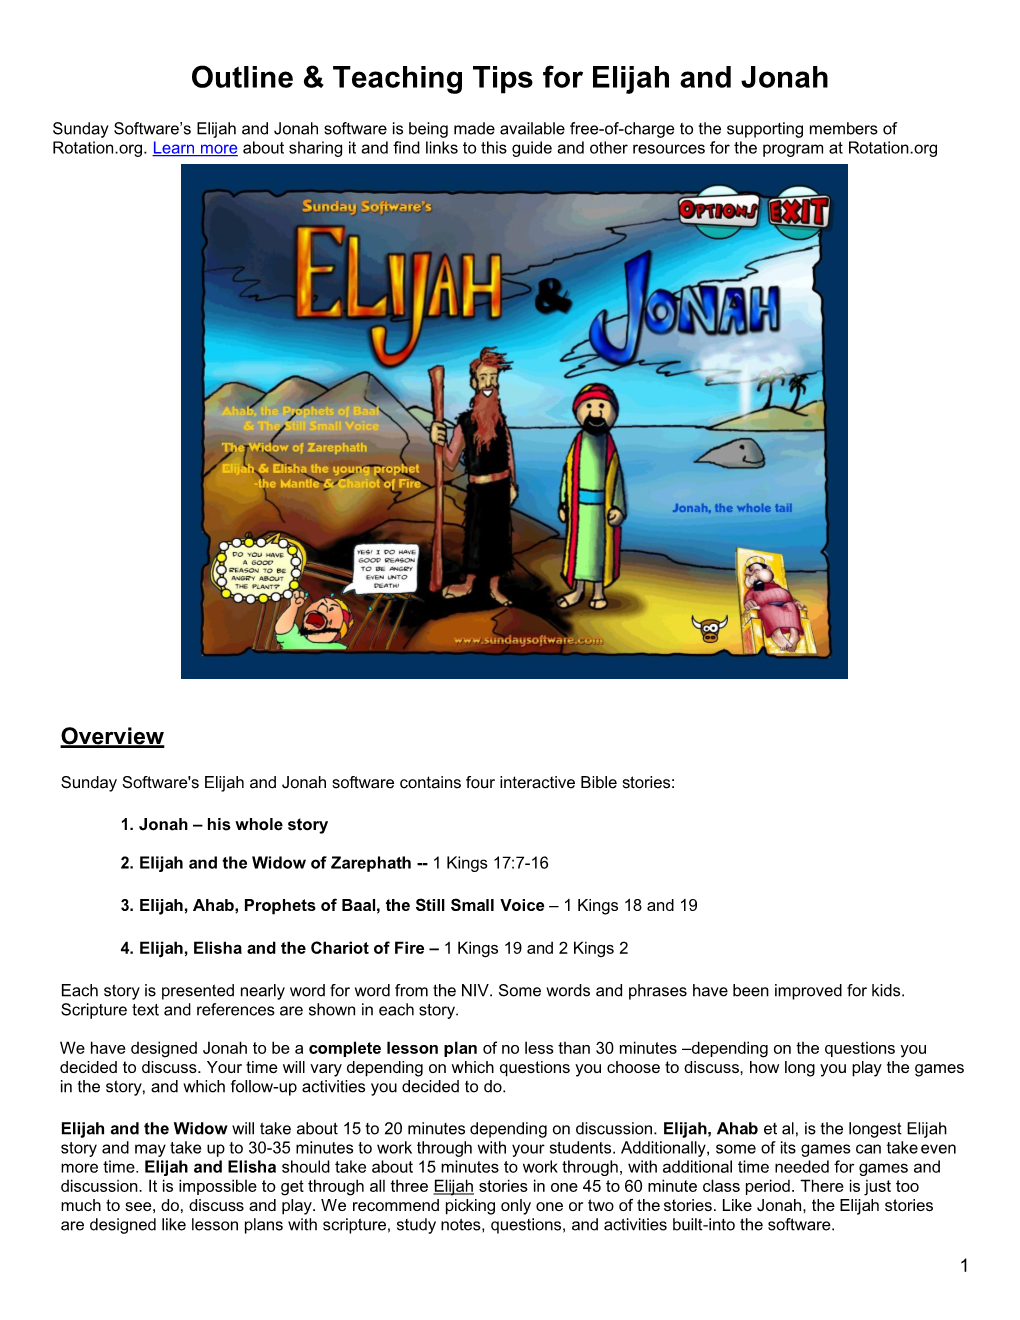 Updated Outline and Guide-To-Elijah-Jonah